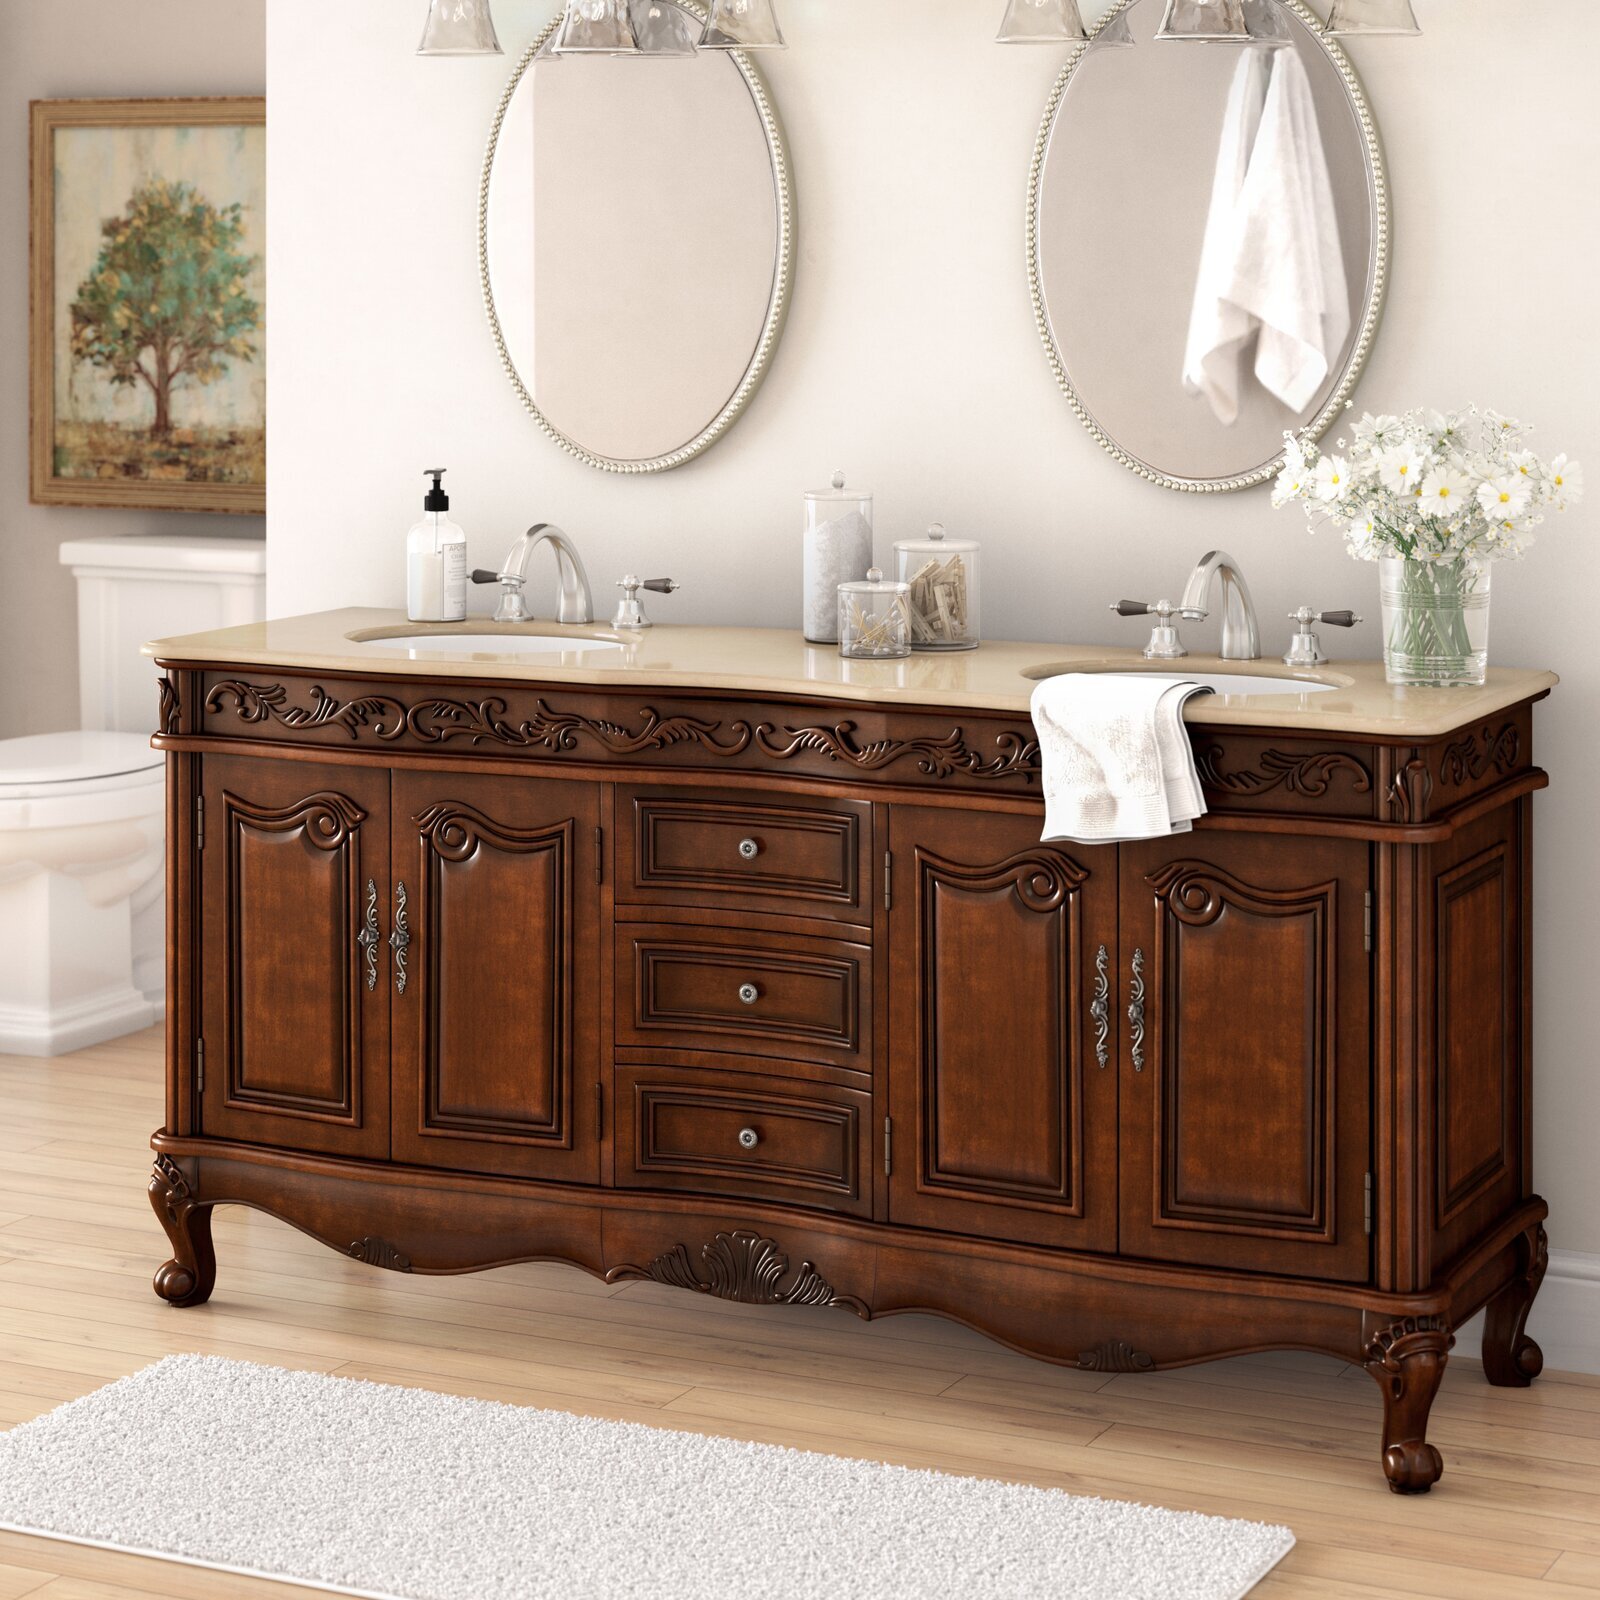 Flat Top Surfaced 72 inch Bathroom Vanity with Makeup Area and Sunken Basins